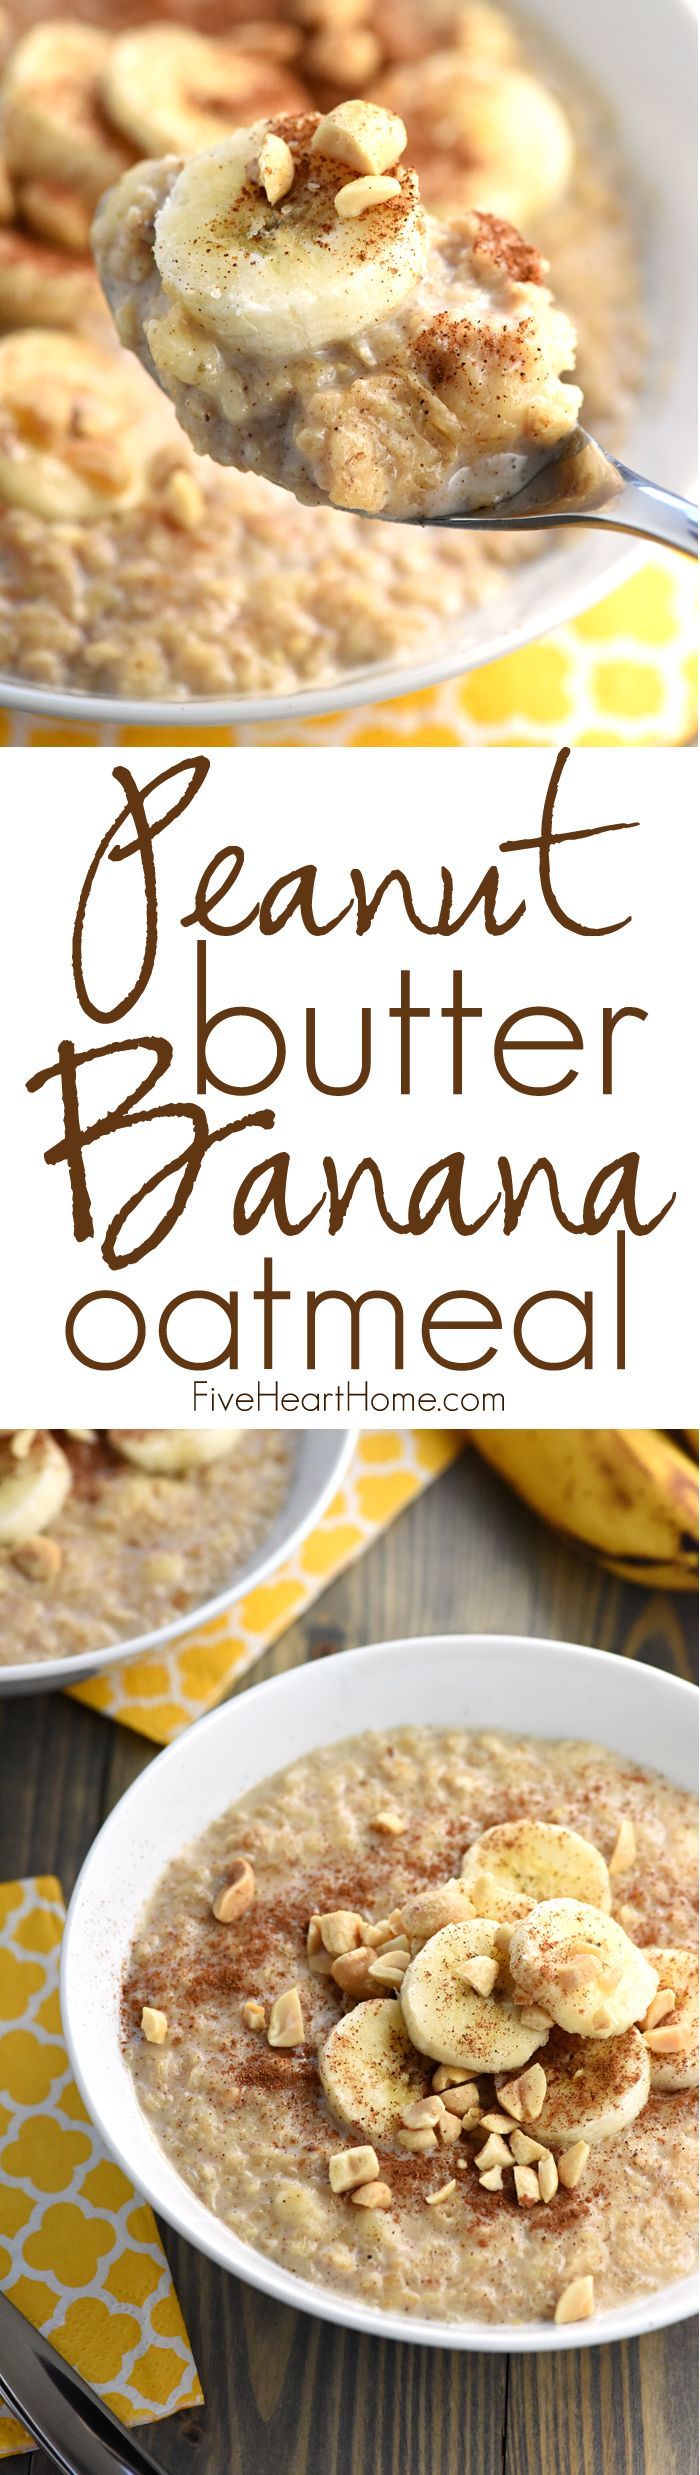 Peanut Butter Banana Oatmeal ~ in just a few short minutes, you can enjoy a hot, wholesome, homemade breakfast flavored with